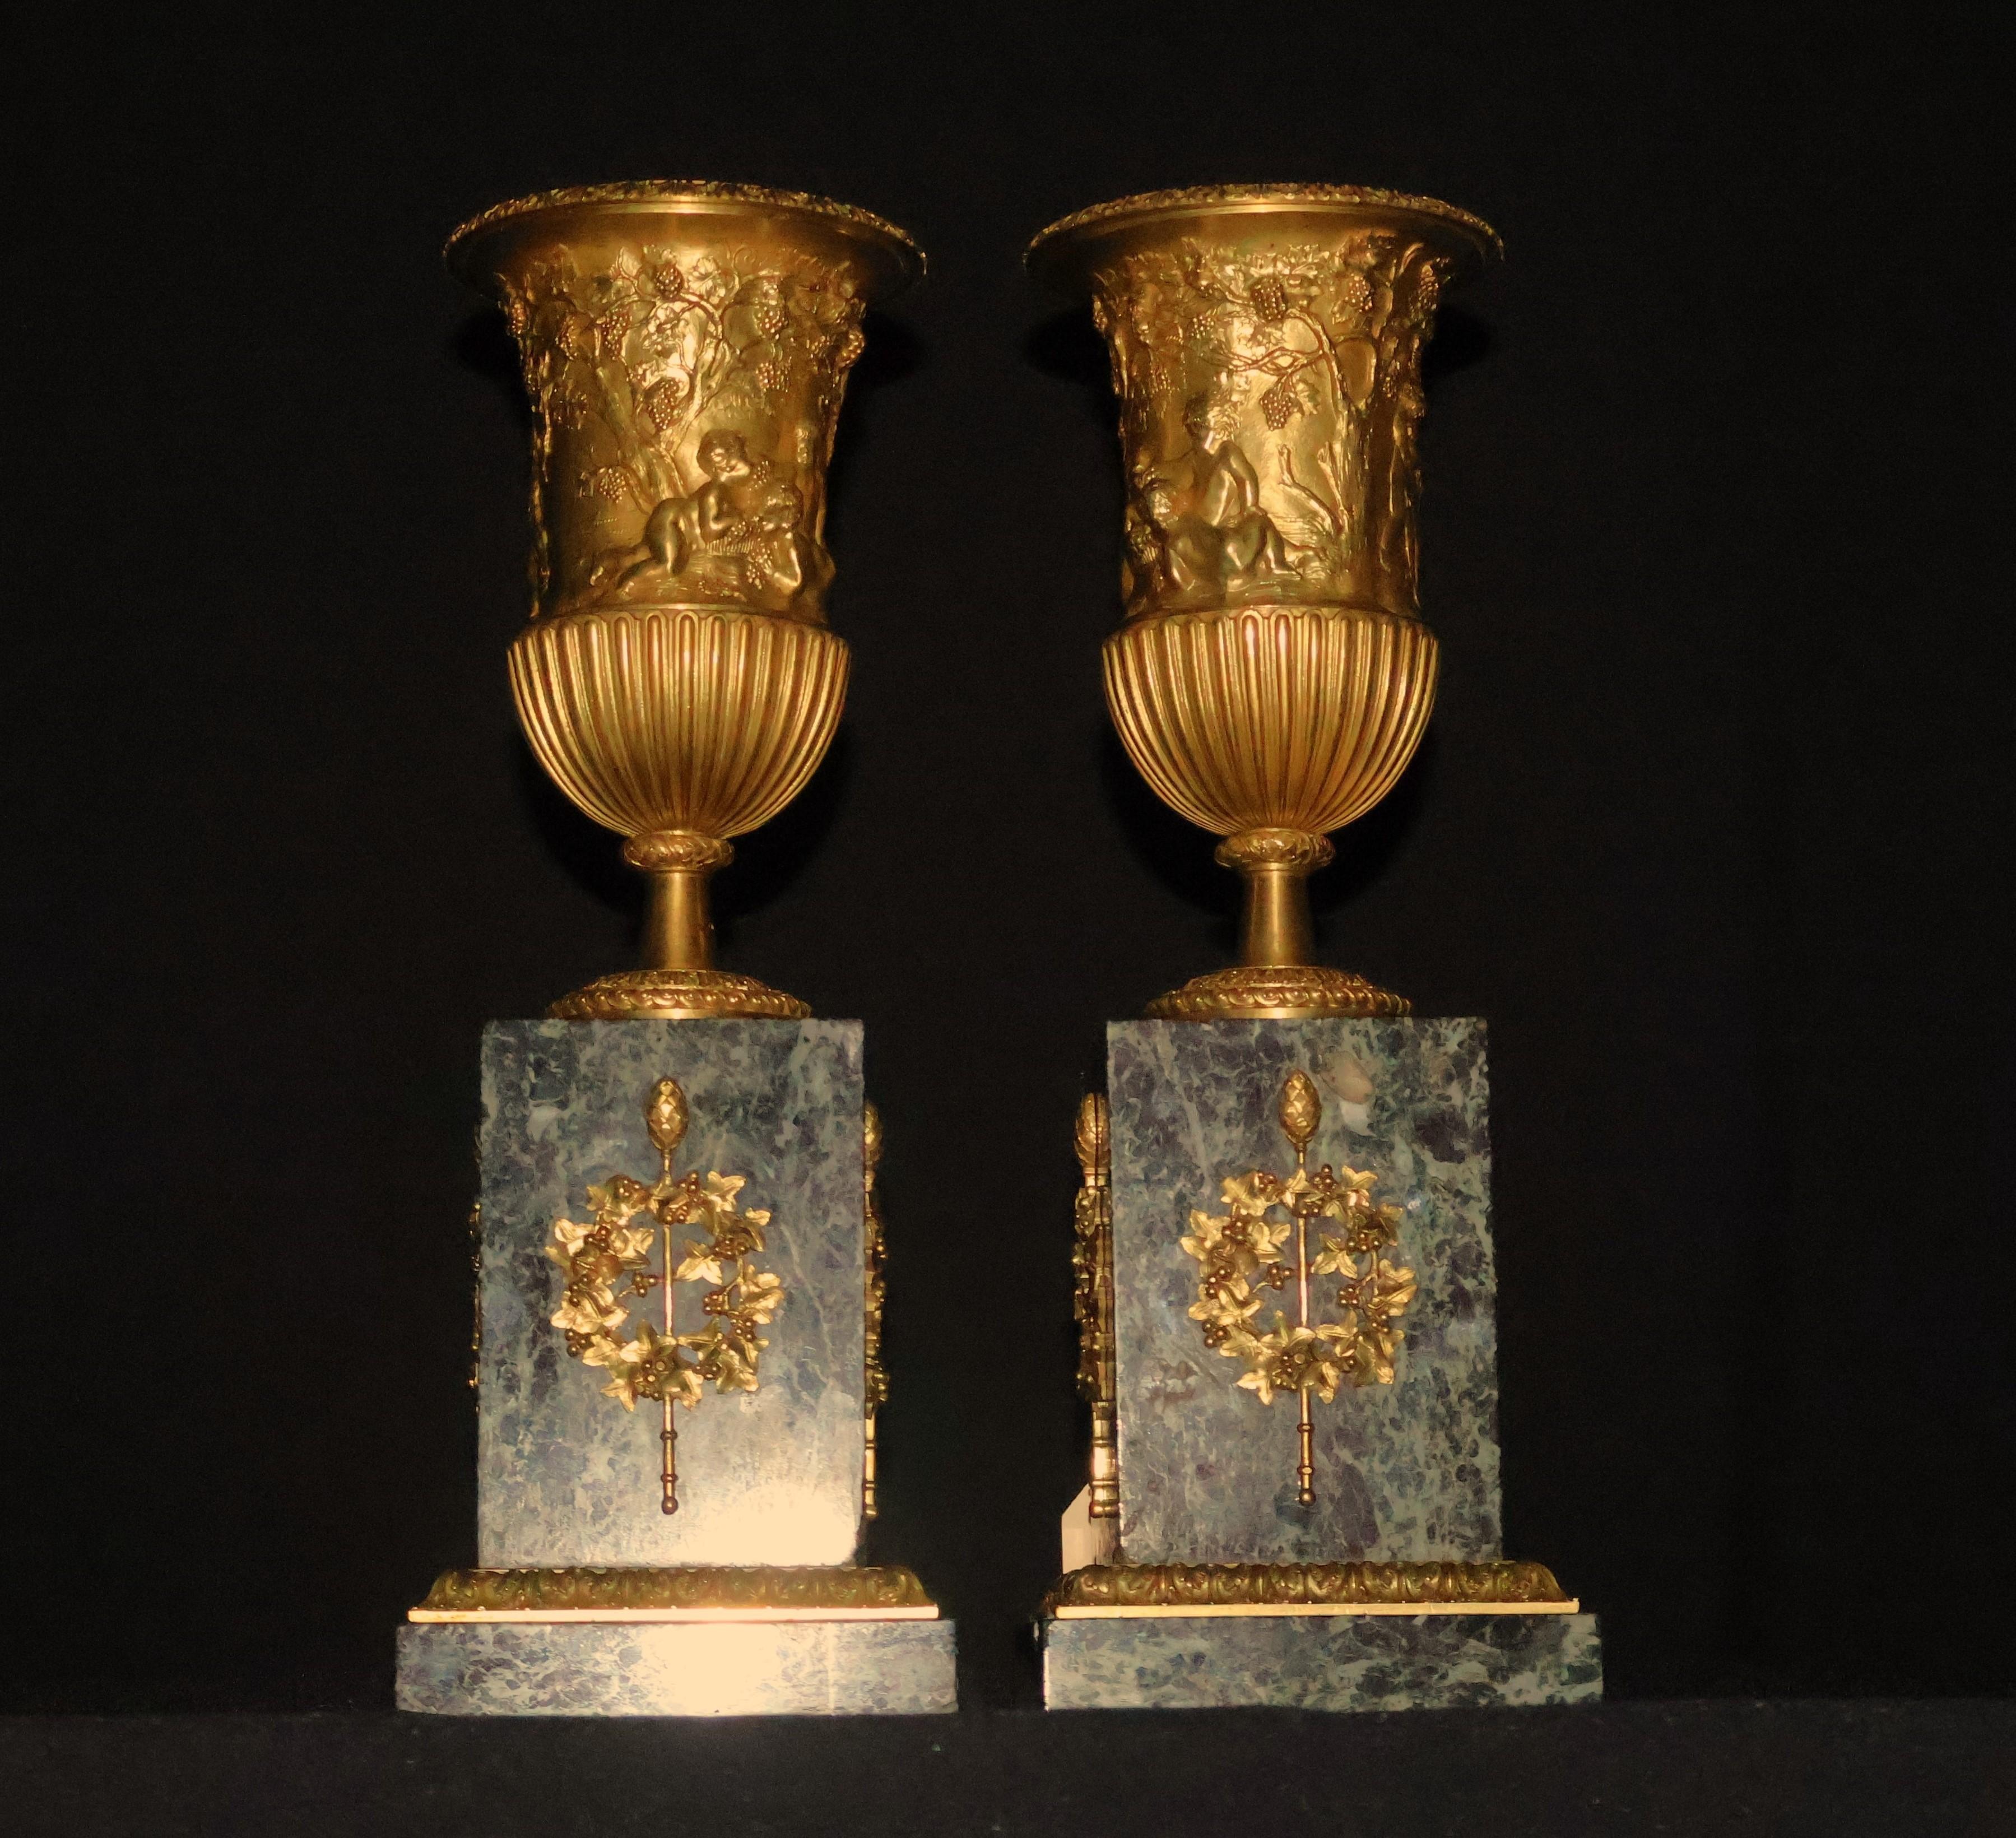 Pair of gilt bronze urns raised on a marble plinth with ormolu mounts (CW5595). The quality is superb, chasing is 10 on 10. France, circa 1870. Dimensions: Height 15 1/2